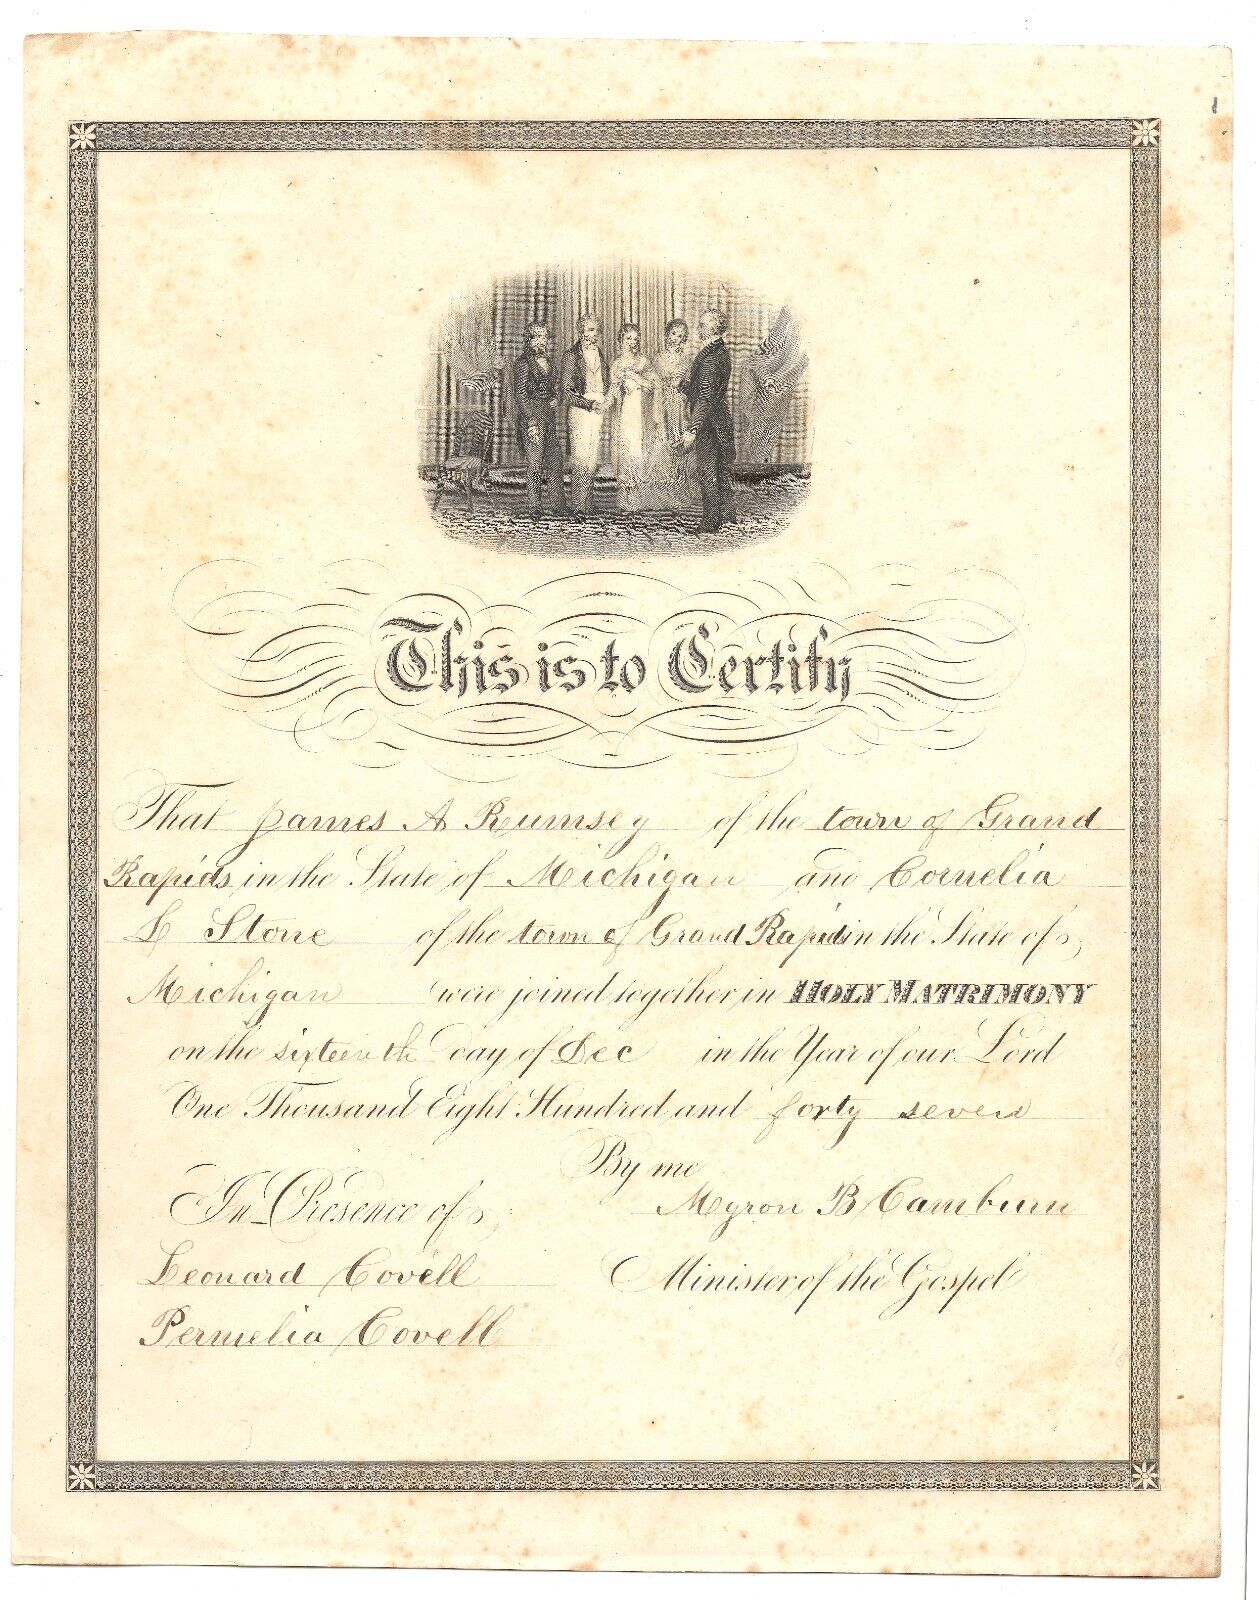 Rare 1847 marriage certificate Grand Rapids early settler, James Rumsey, history